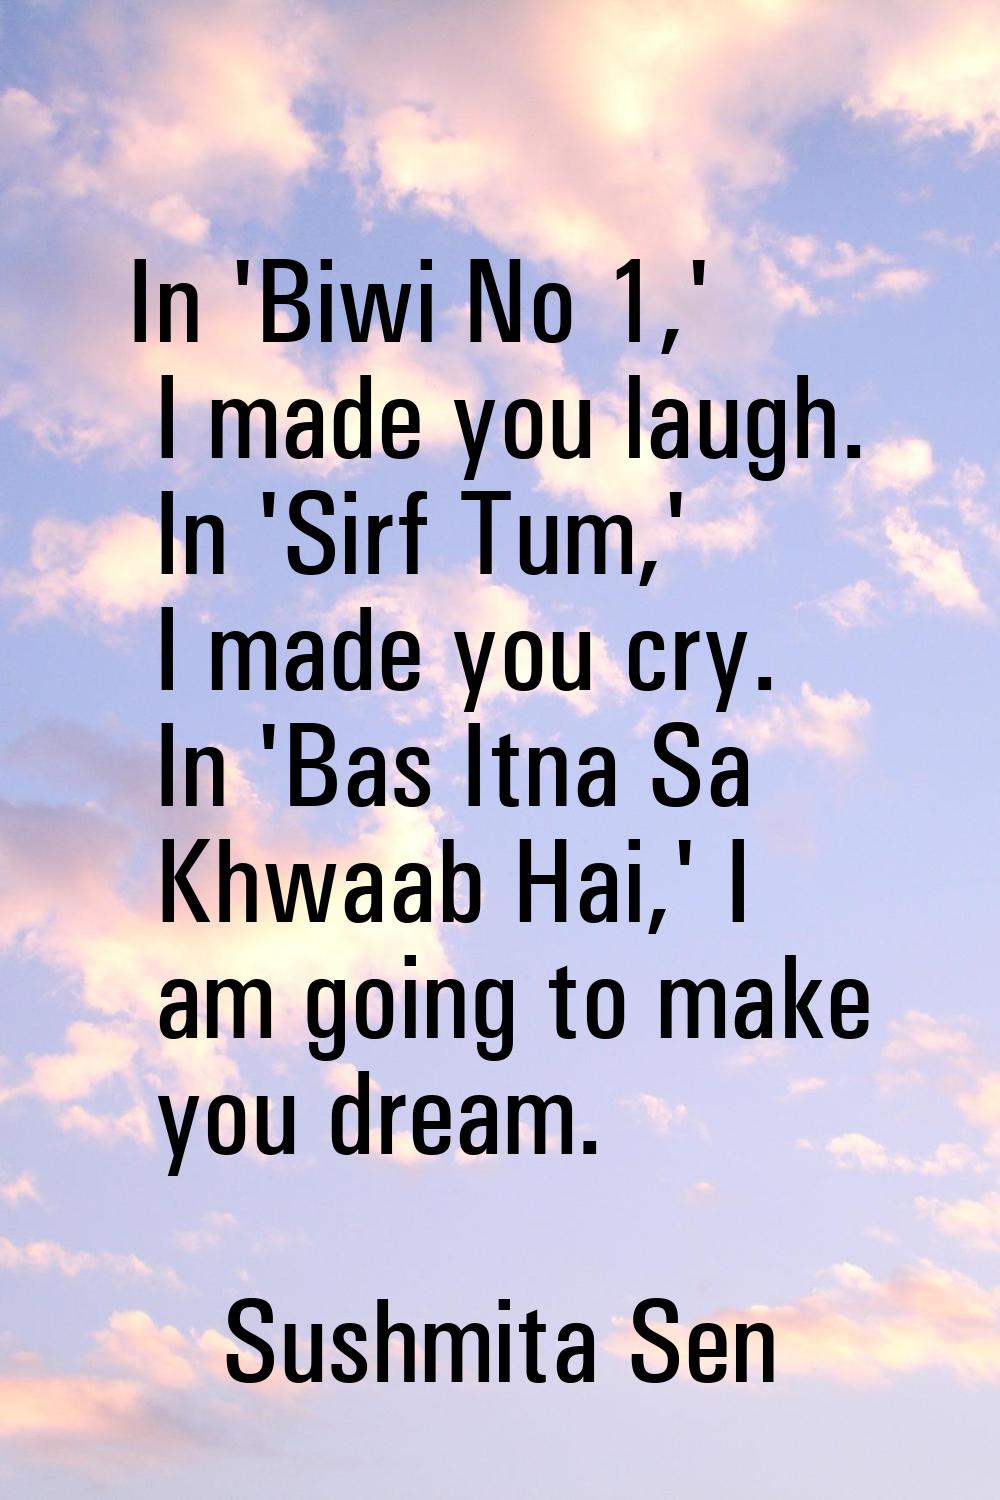 In 'Biwi No 1,' I made you laugh. In 'Sirf Tum,' I made you cry. In 'Bas Itna Sa Khwaab Hai,' I am 